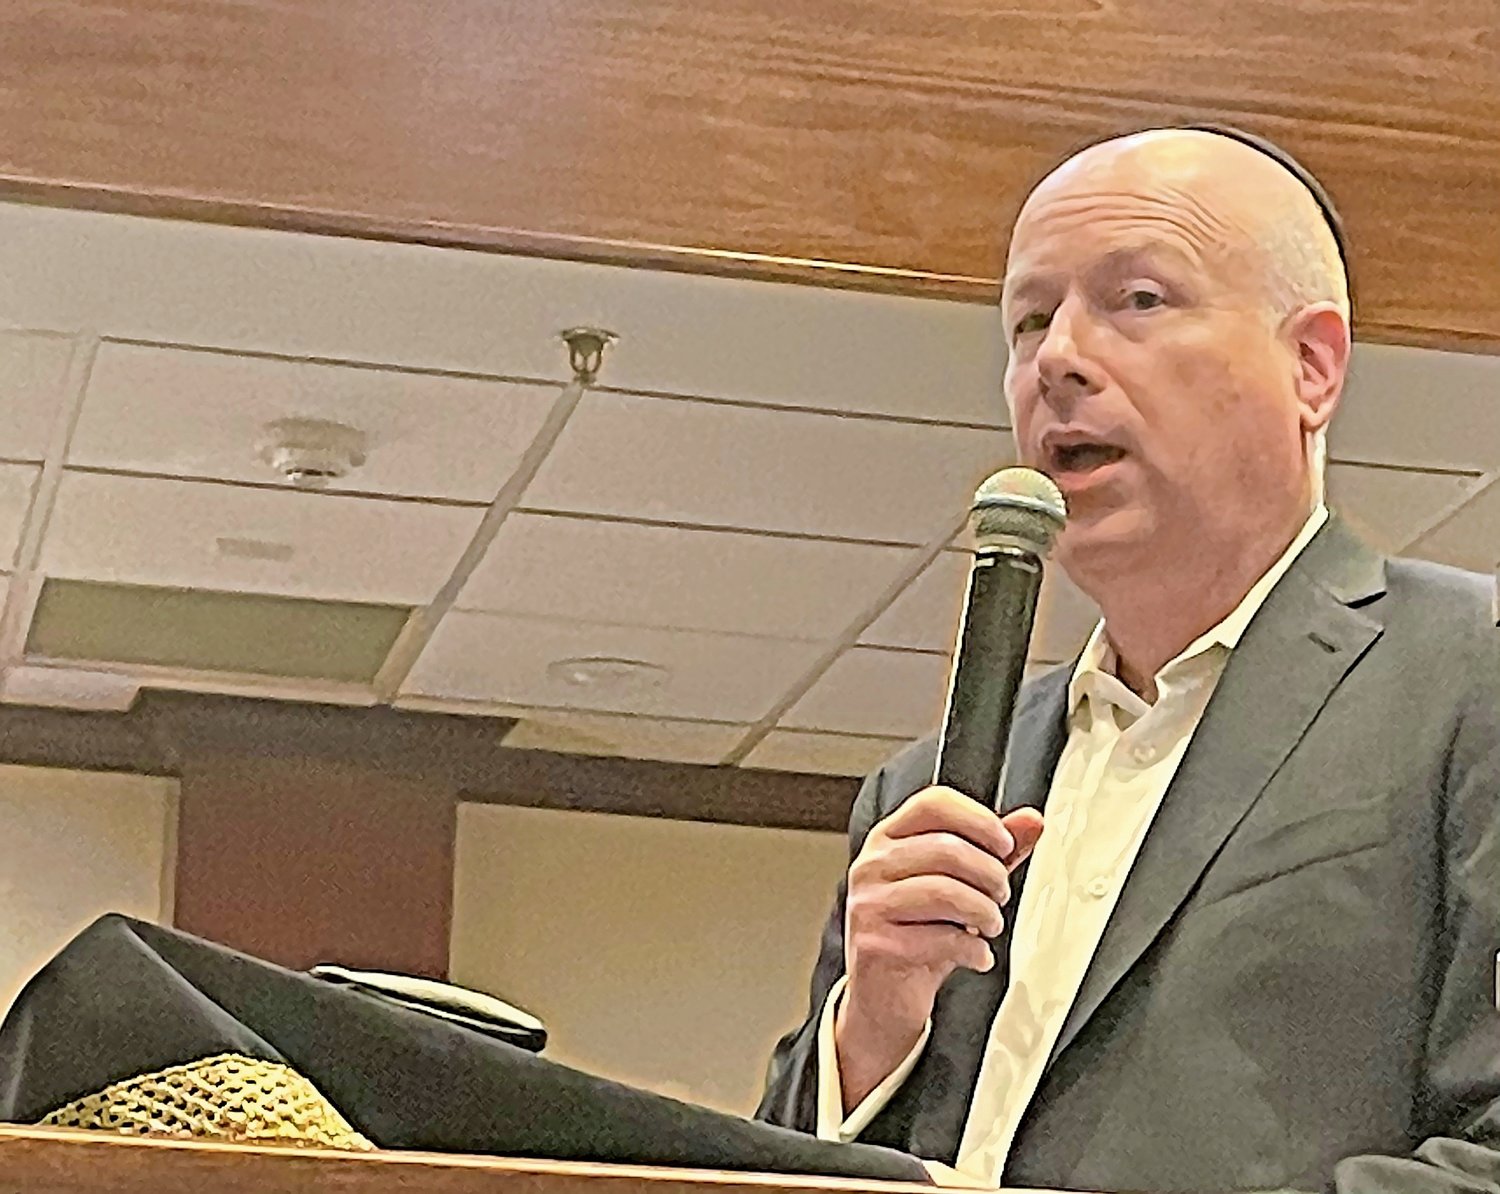 Former White House envoy to the Middle East, Jason Greenblatt spoke at Young Israel of North Woodmere on Sept. 7.